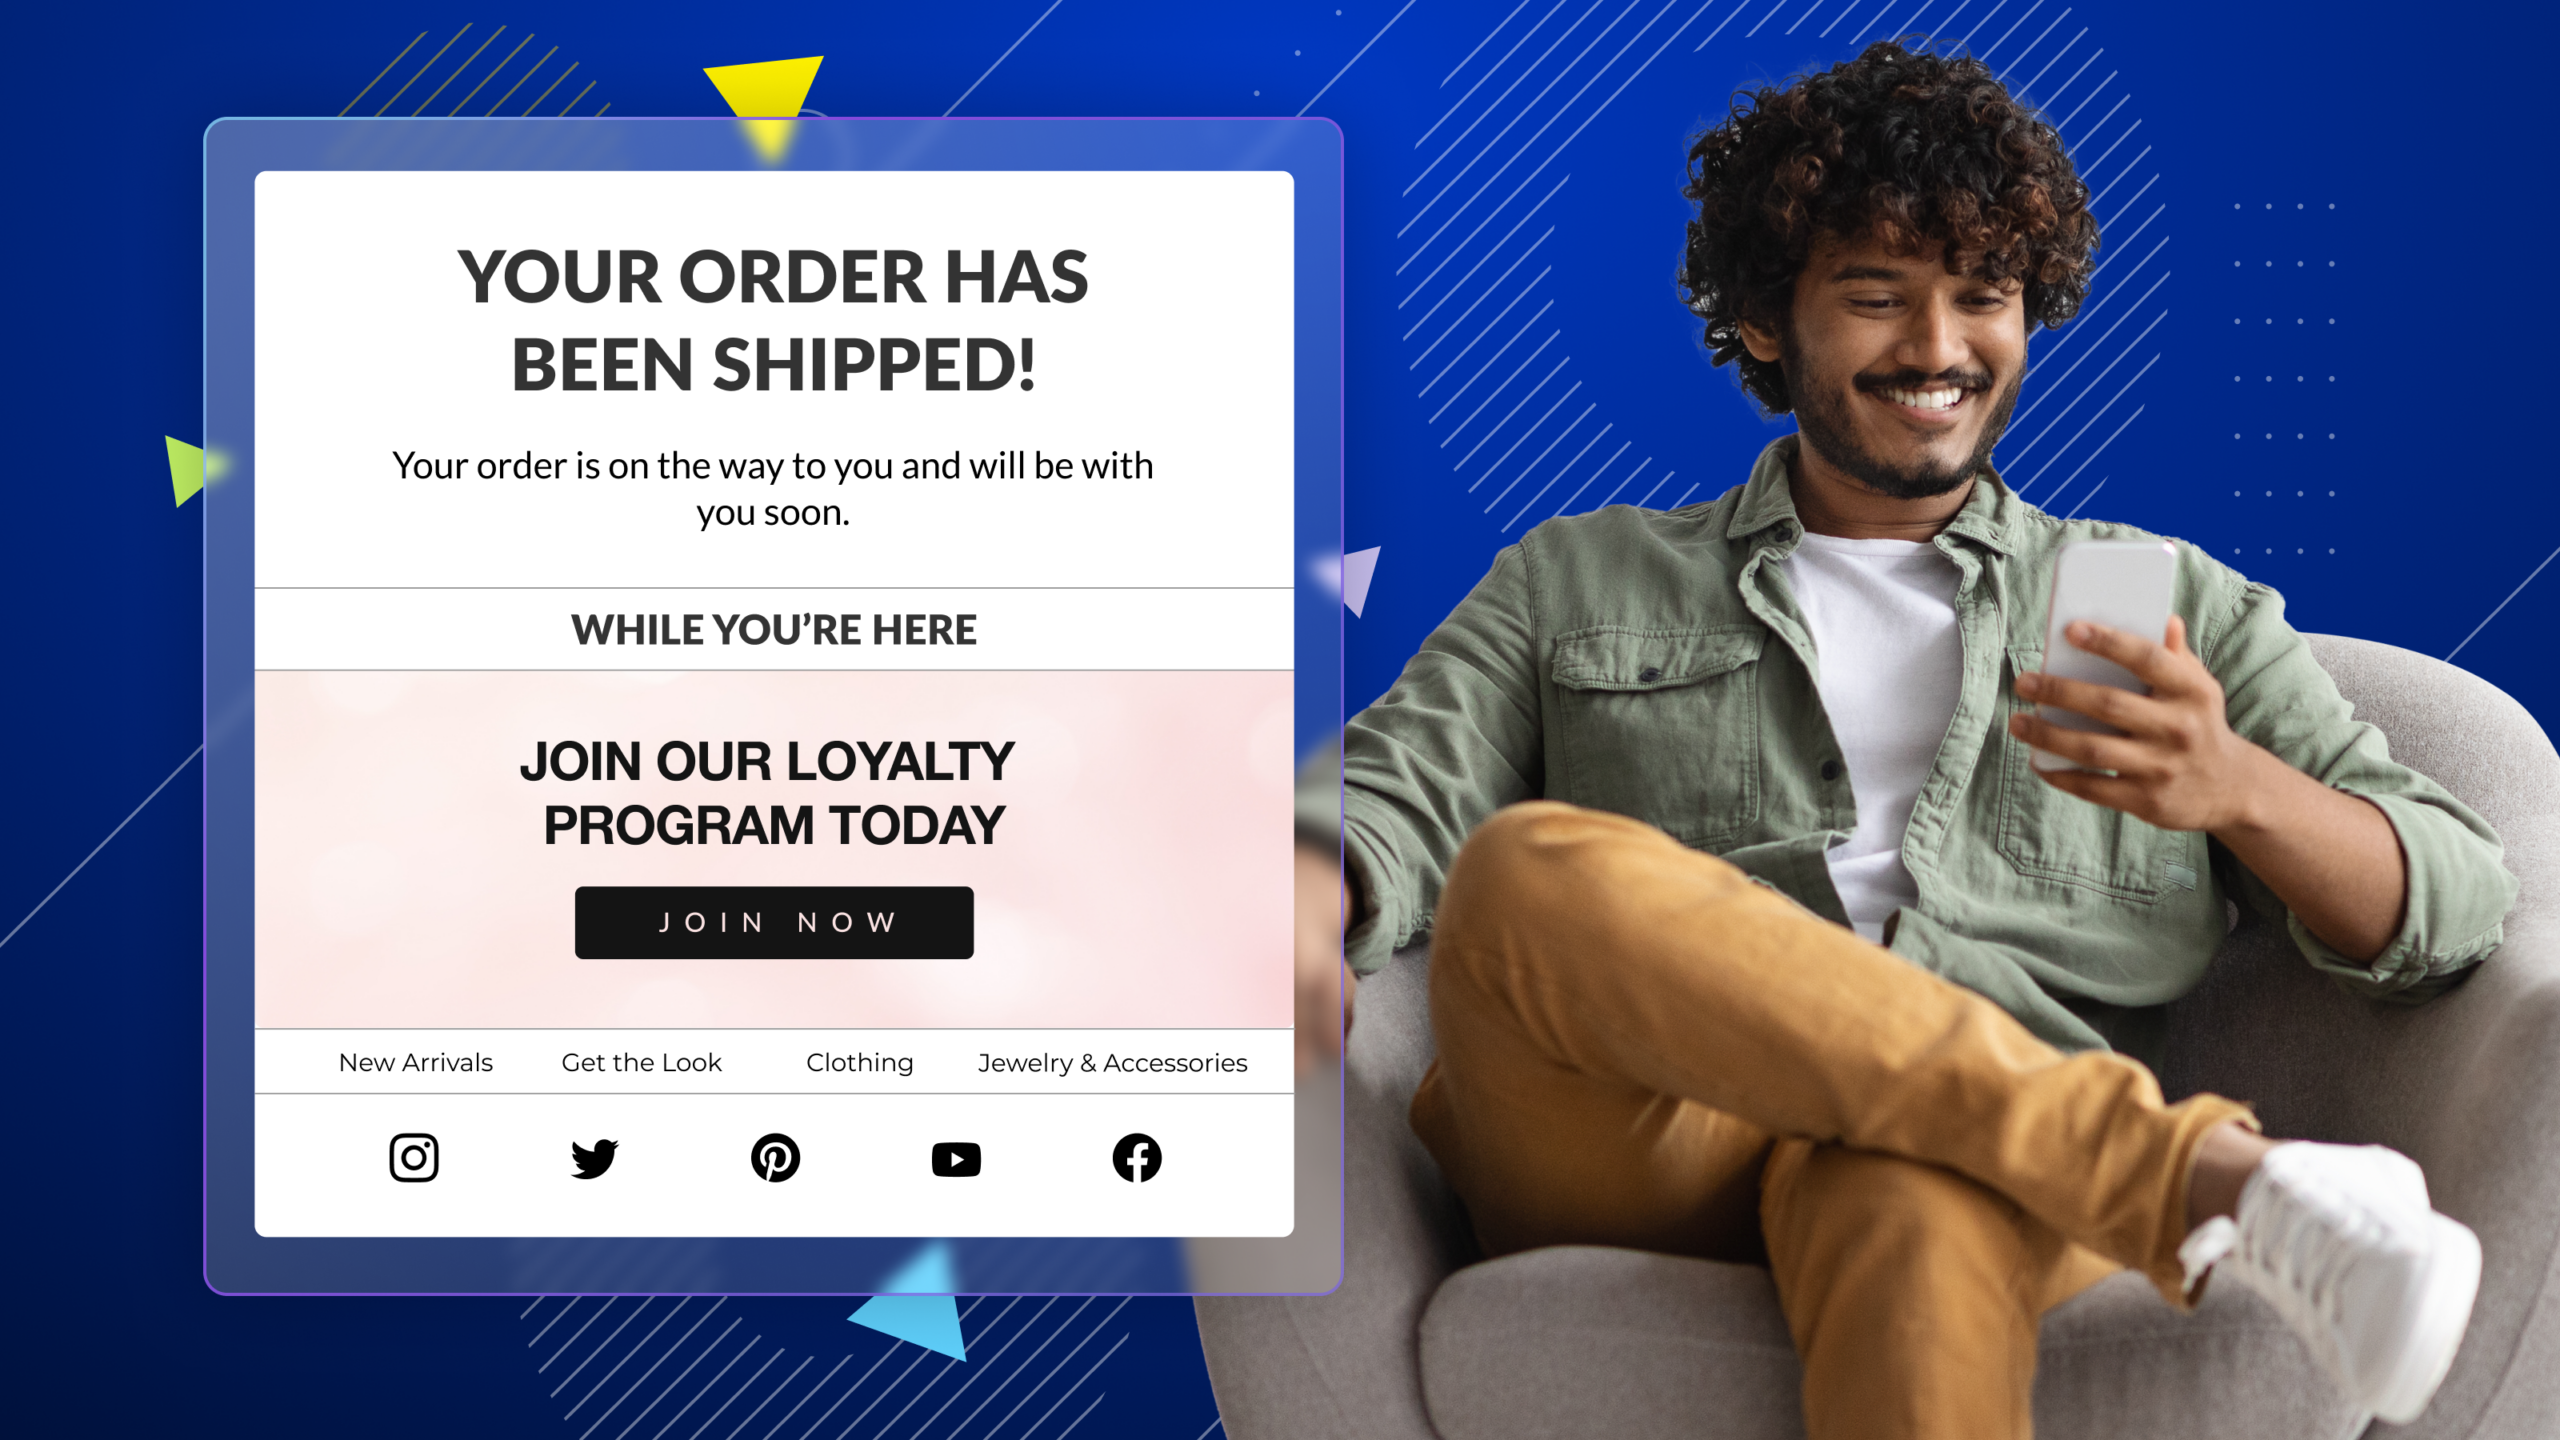 Loyalty program banner in a post-purchase email